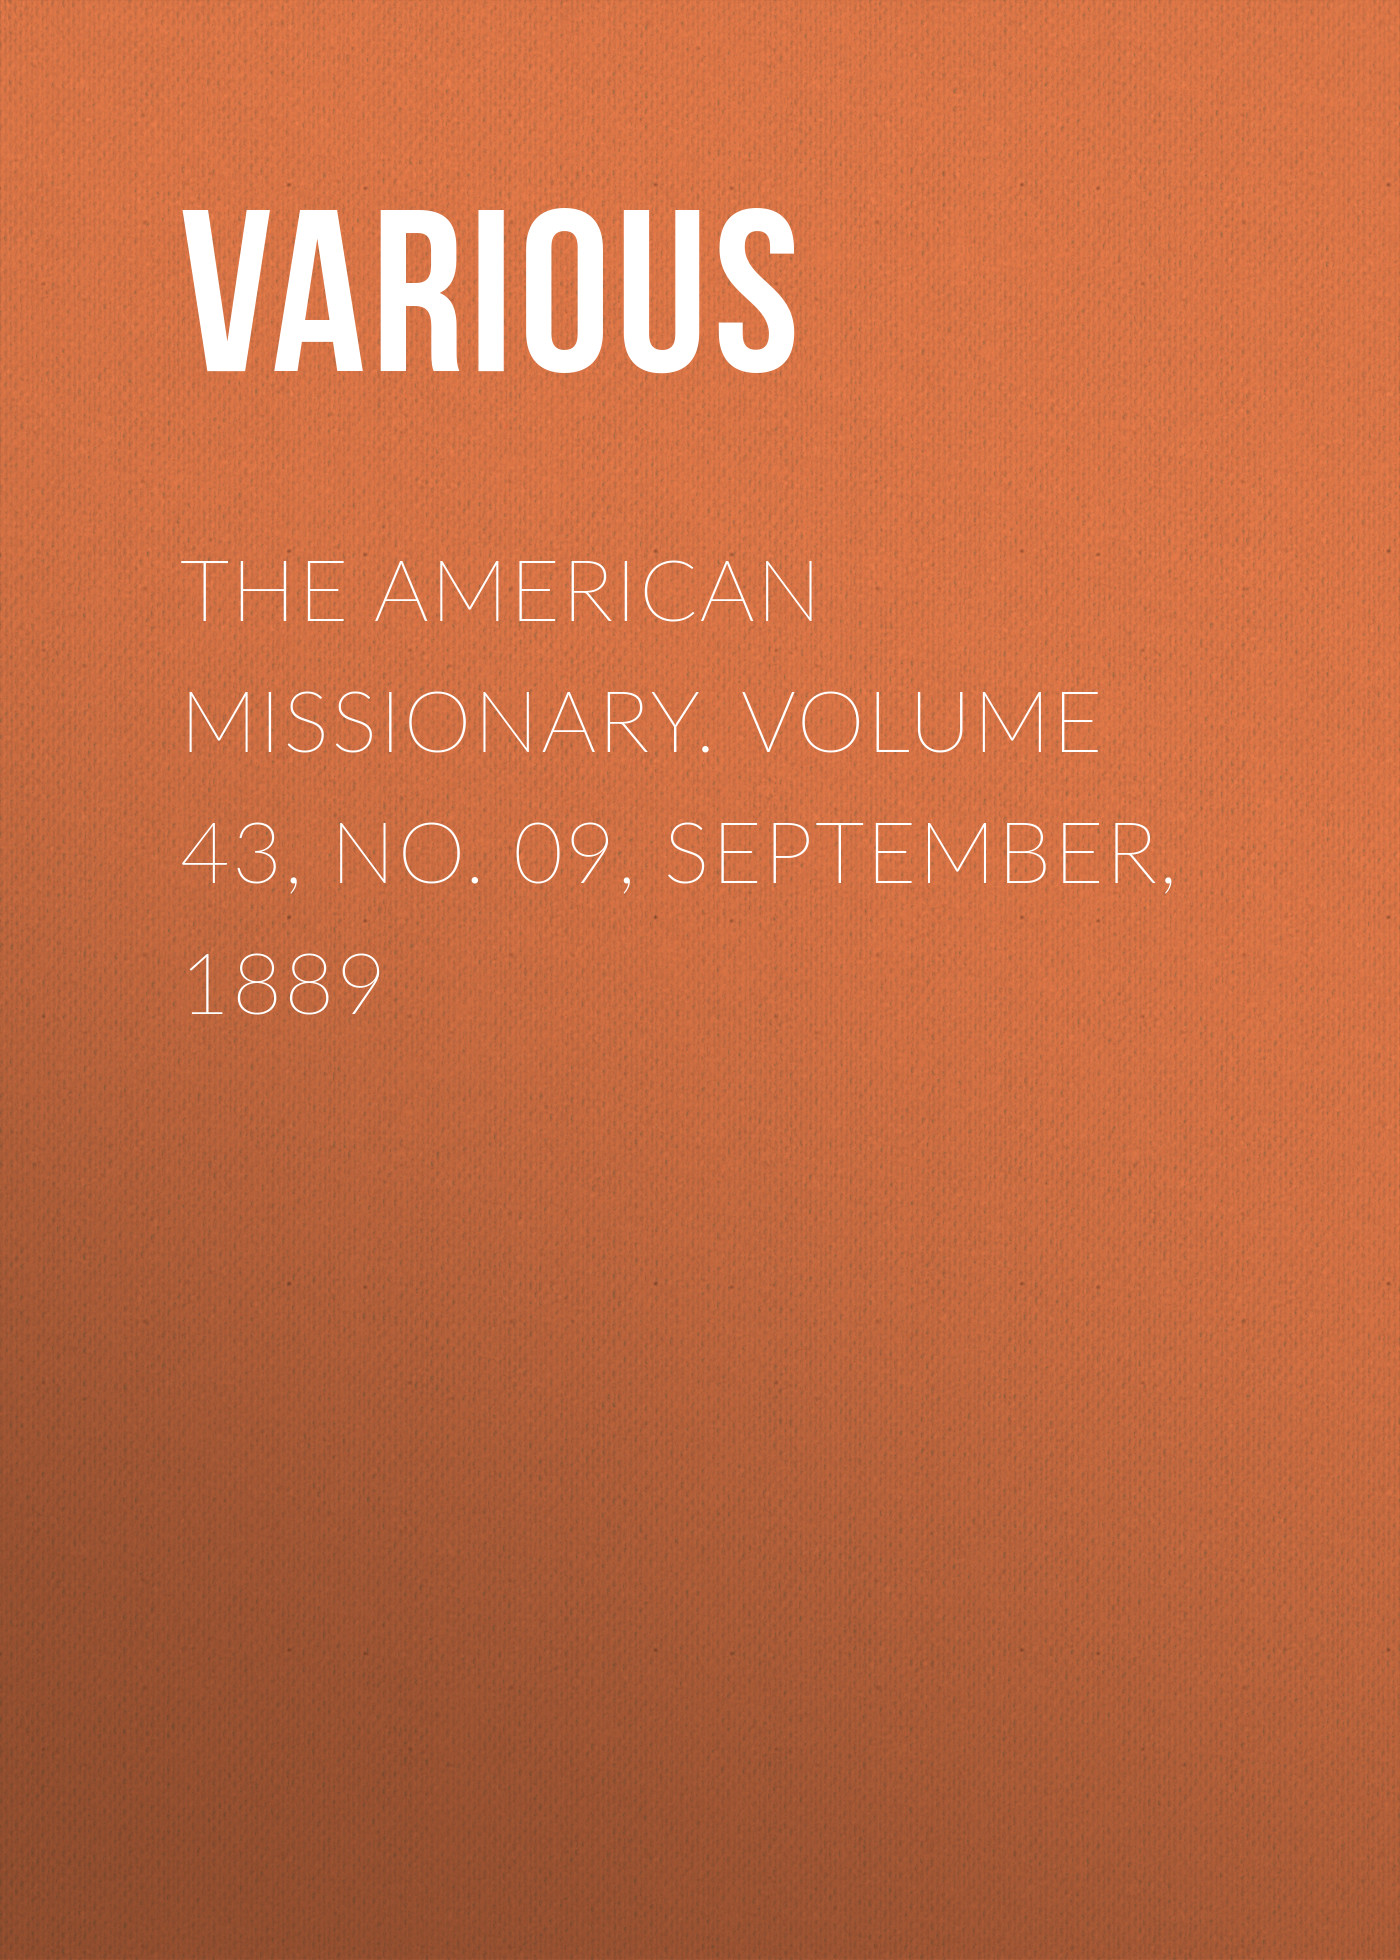 The American Missionary. Volume 43, No. 09, September, 1889